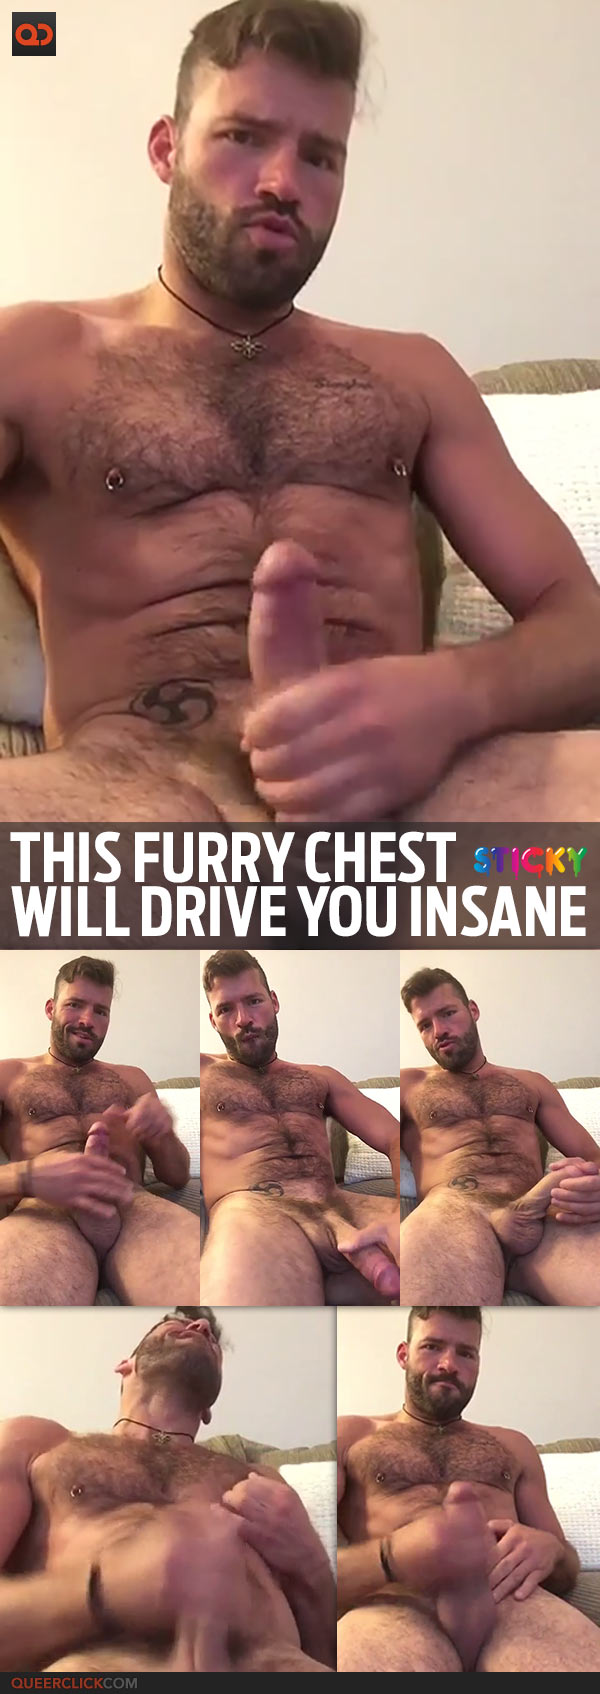 This Furry Chest Will Drive You Insane